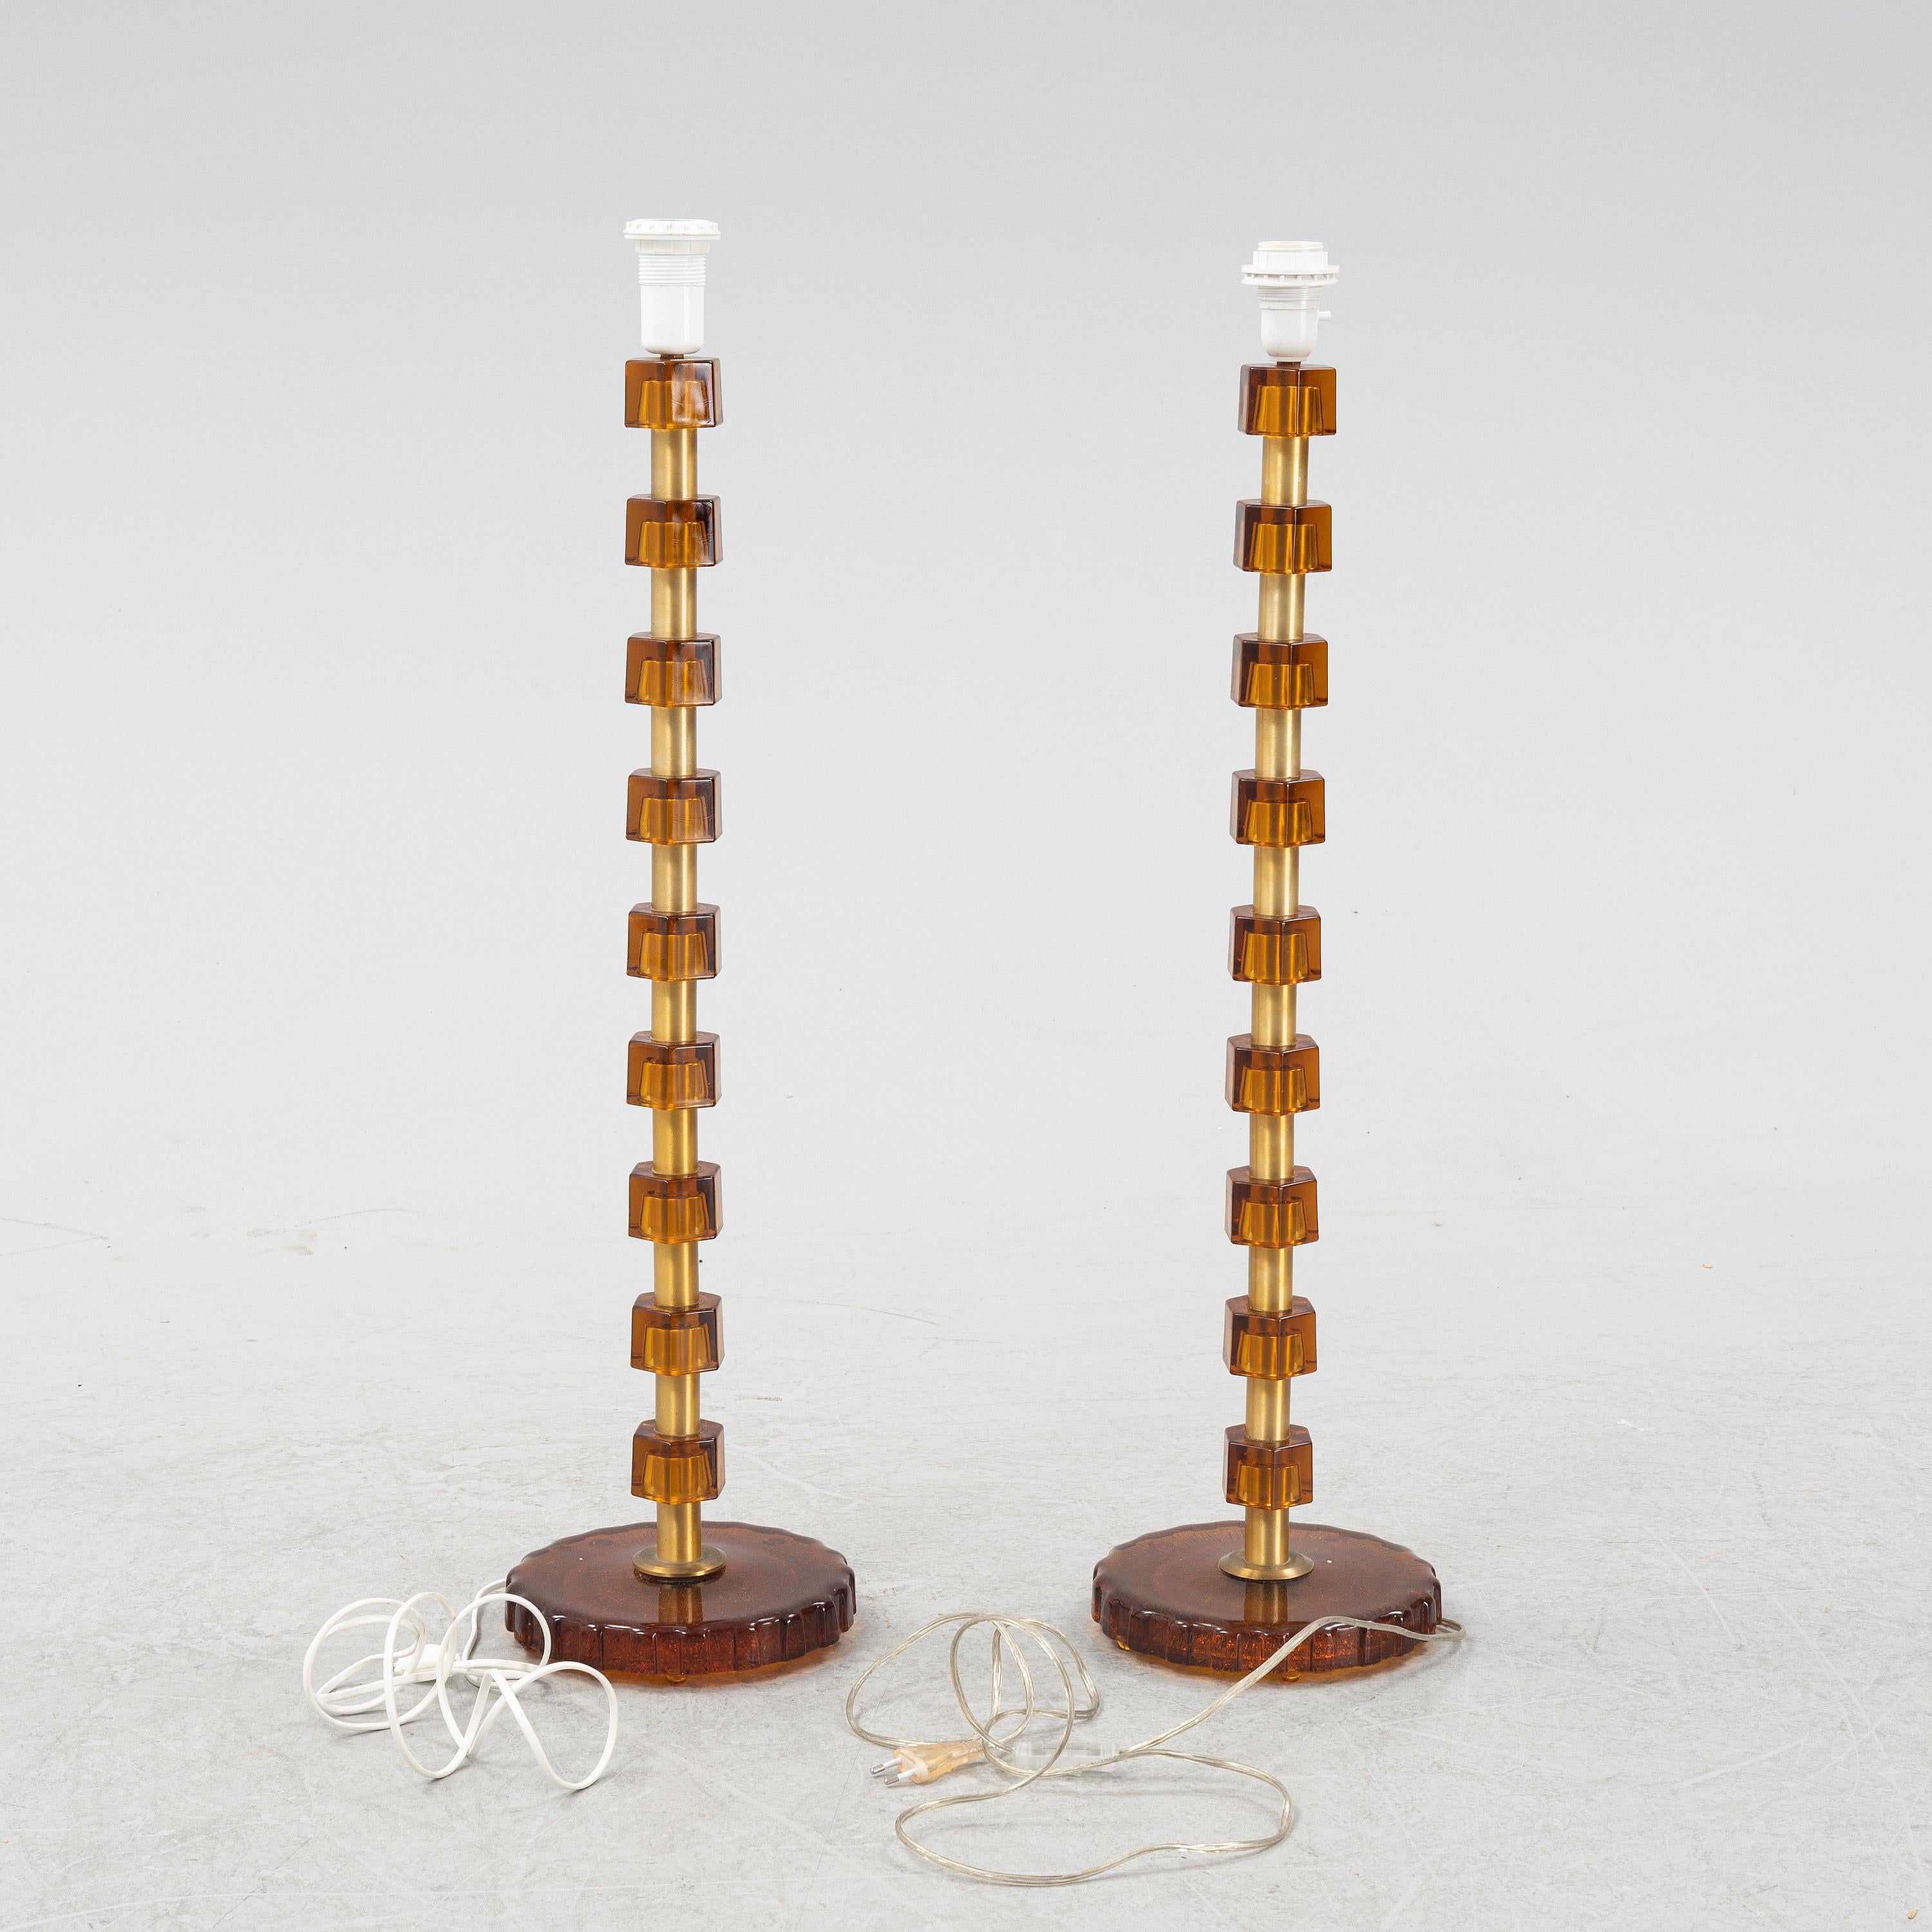 Rare of tall pair of lamps from Sweden 1960s cast glass amber color and brass. Manufactured in Sweden 1960 by Nybro Armaturfabrik Signed Anf 59
Good condition

